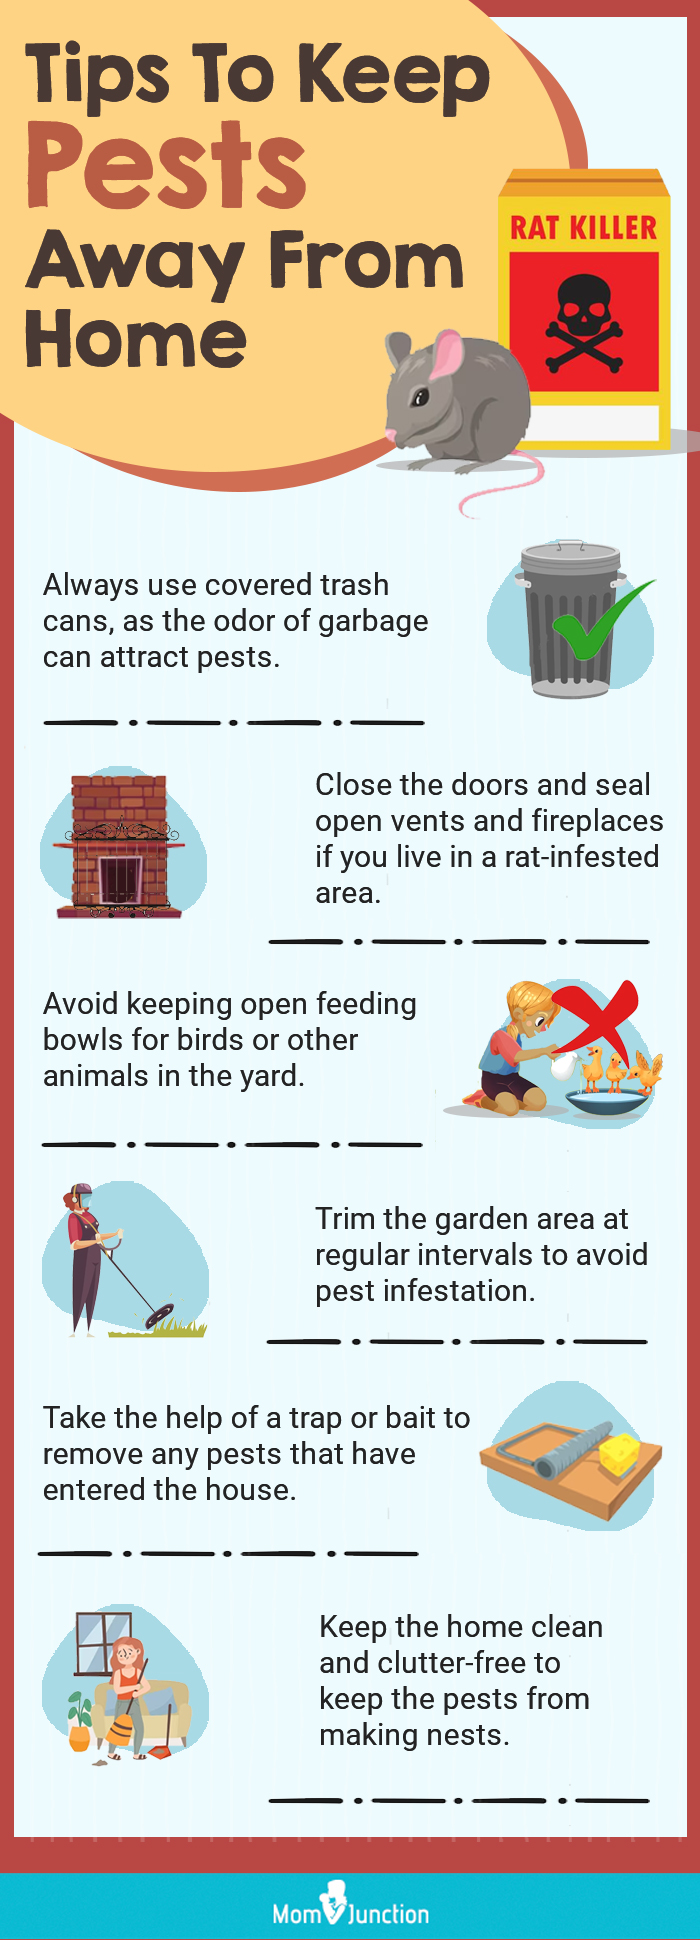 Tips To Keep Pests Away From Home (infographic)